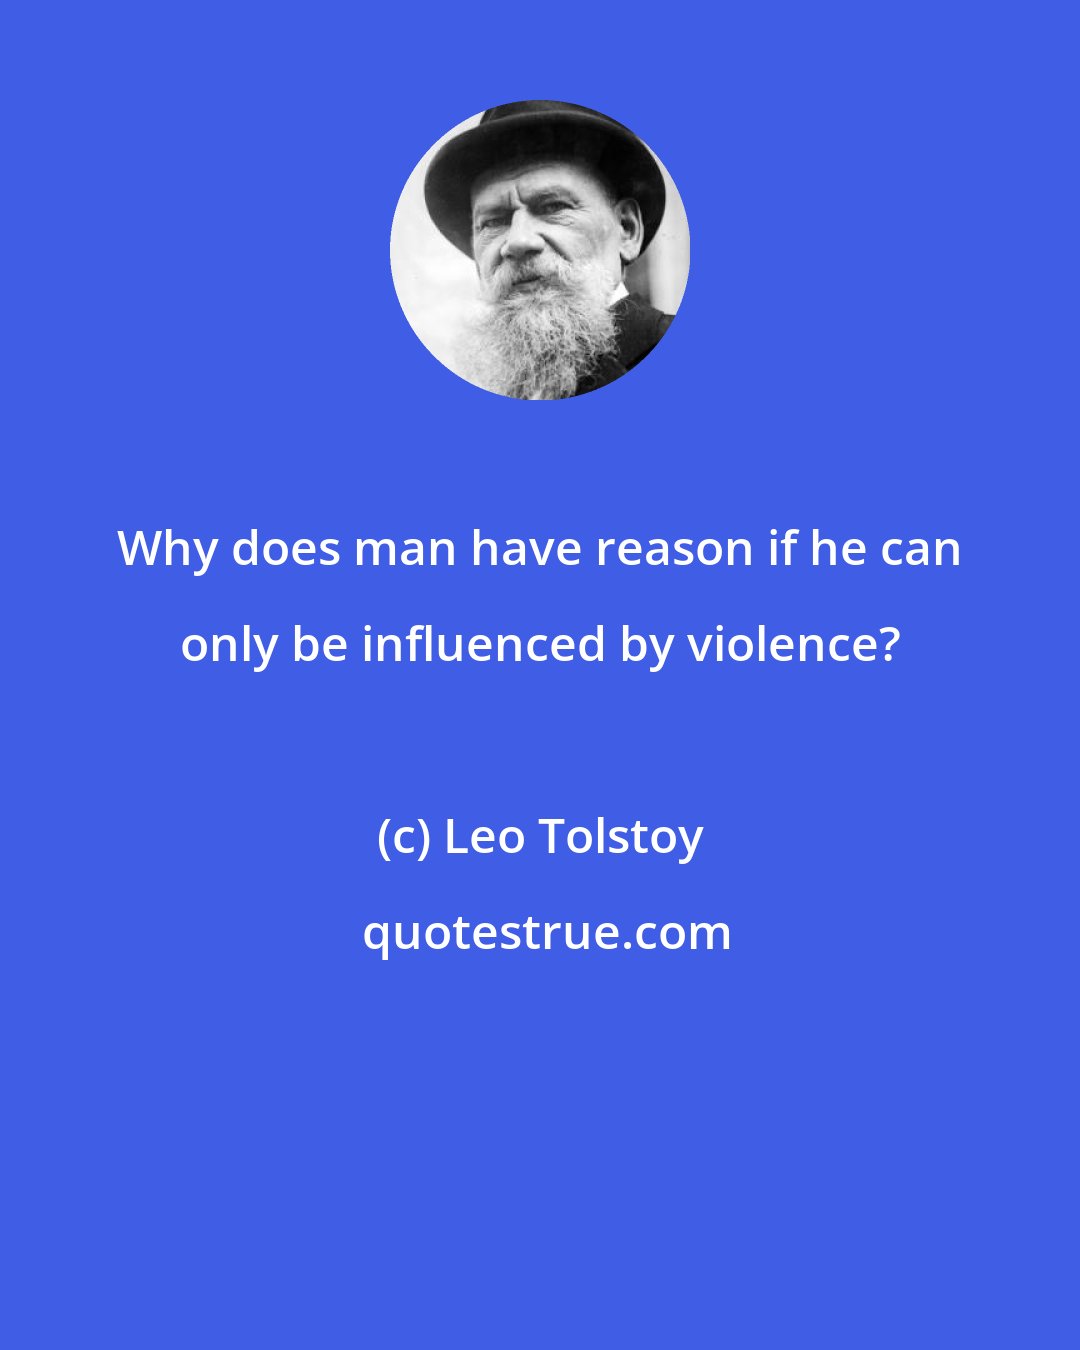 Leo Tolstoy: Why does man have reason if he can only be influenced by violence?